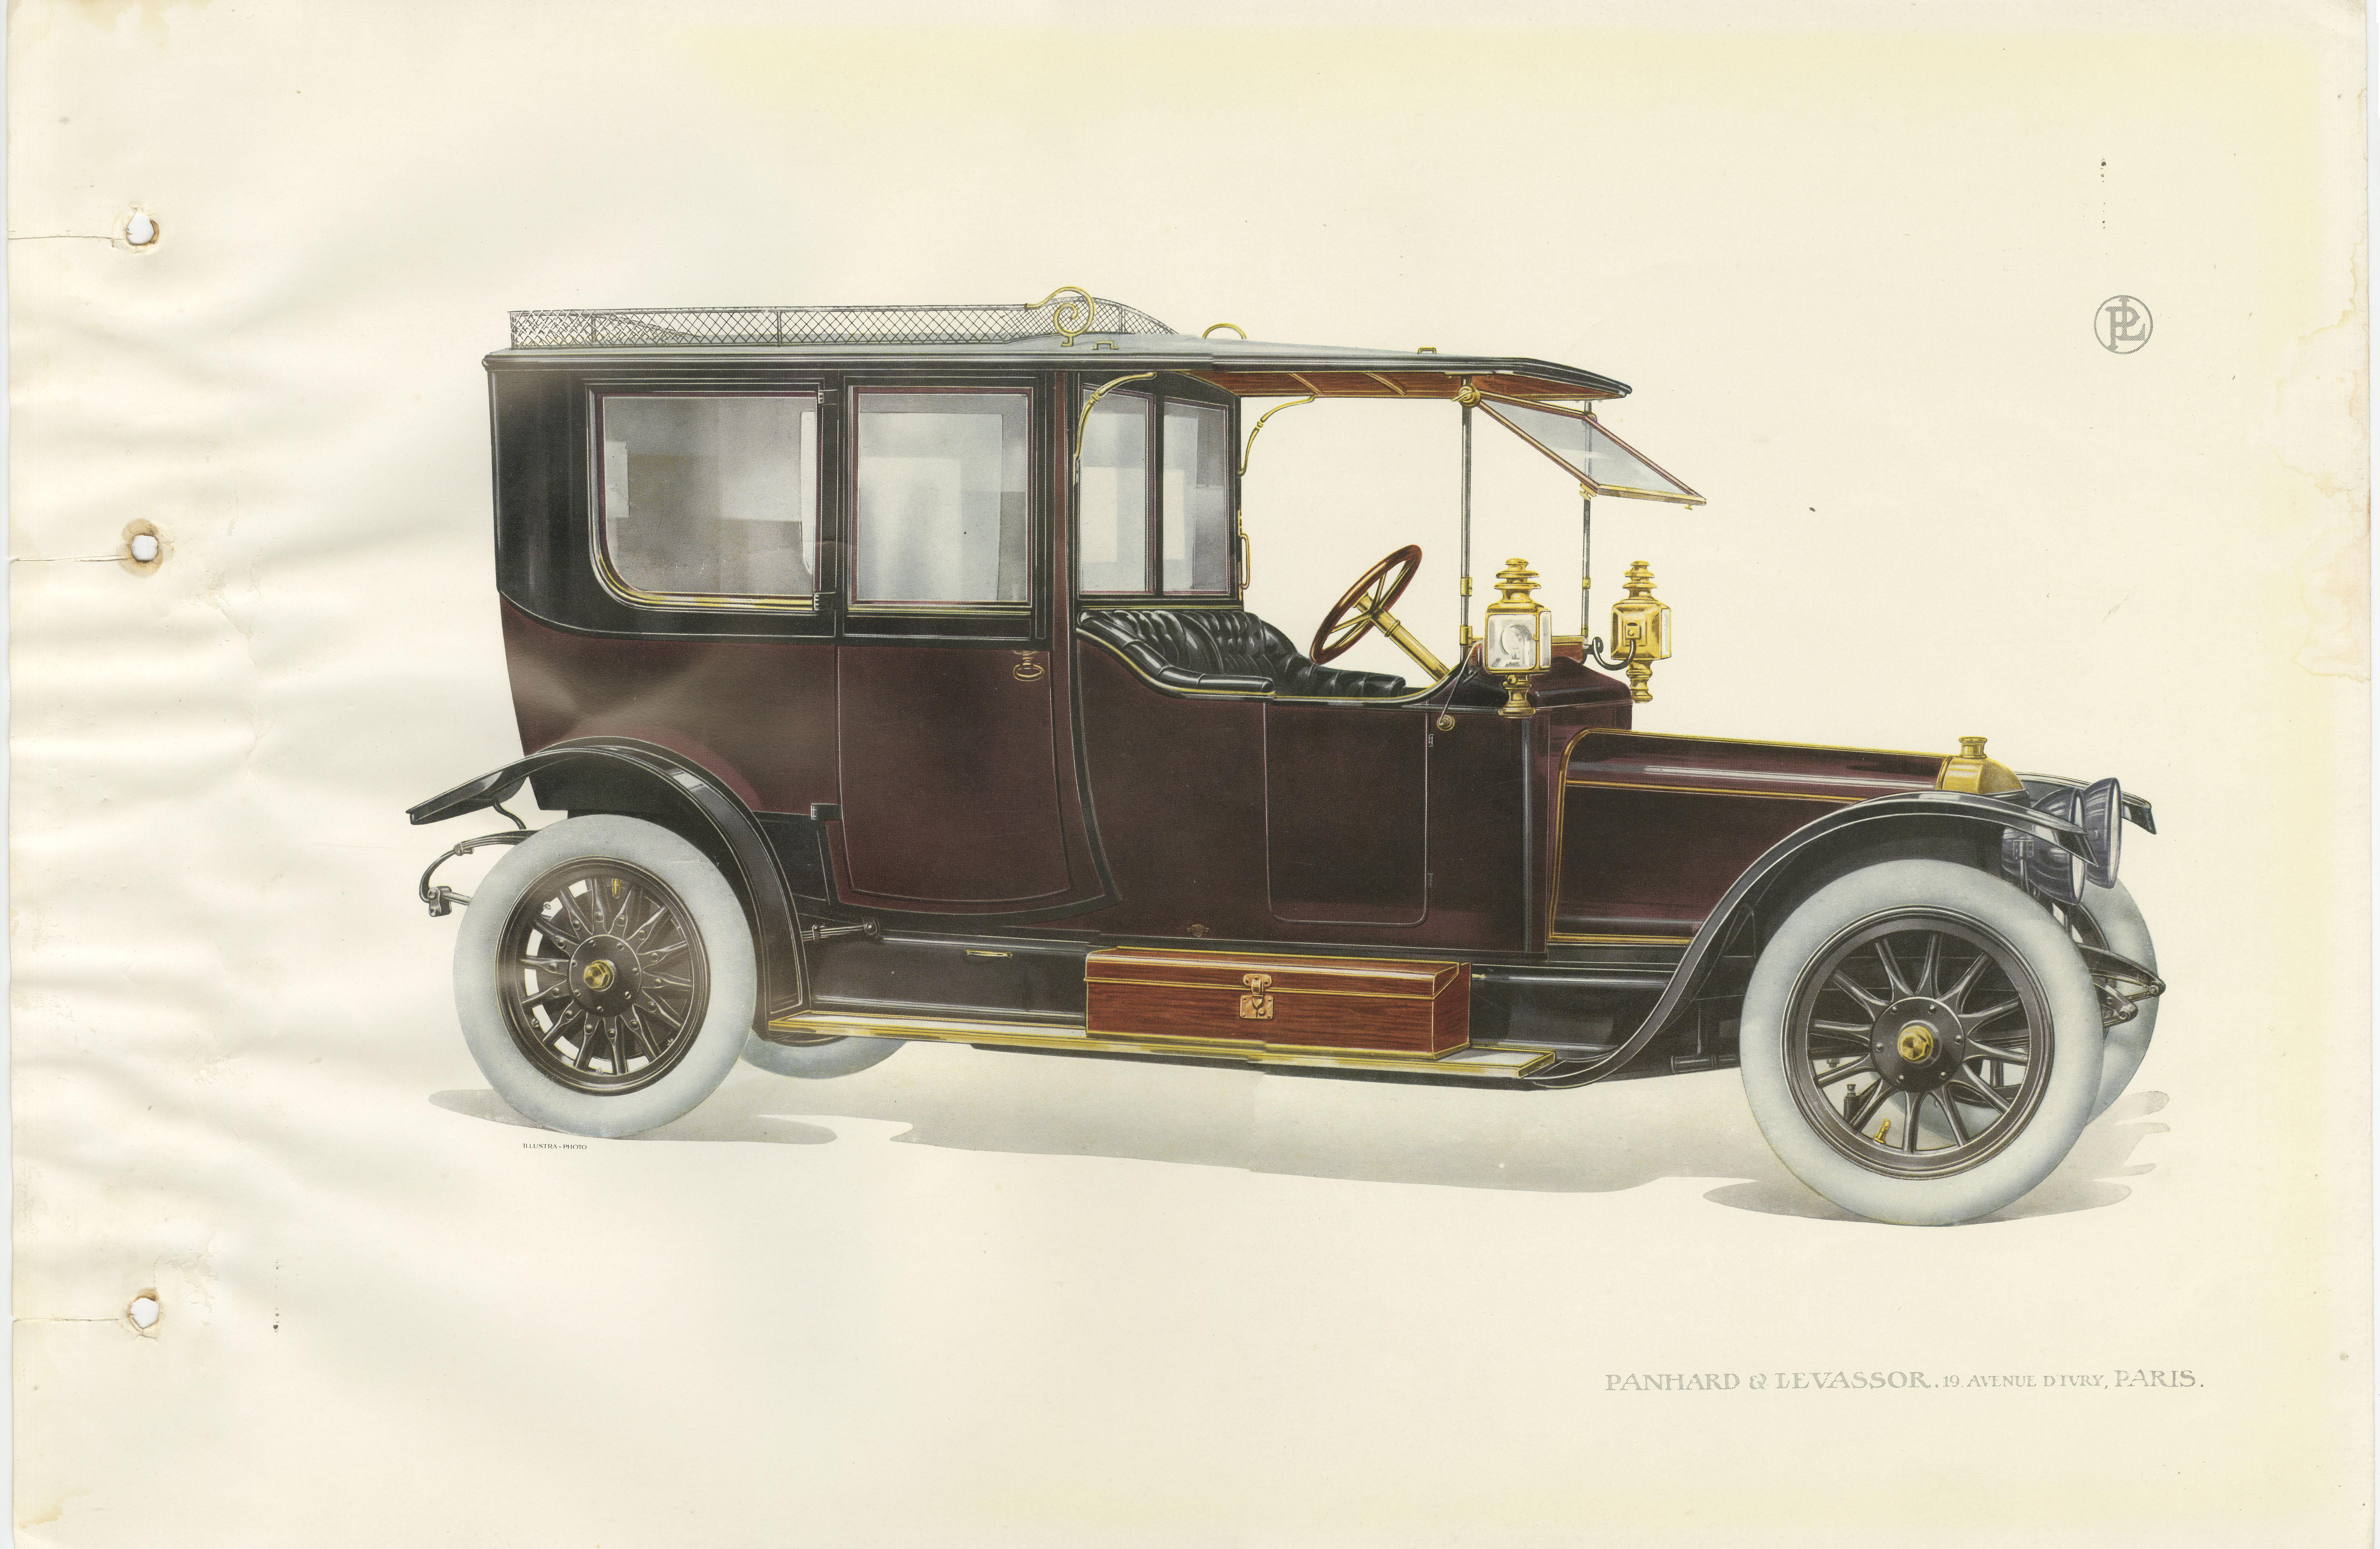 Antique print of a Panhard et Levassor limousine car. This print originates from a rare catalog of the exclusive French brand Panhard & Levassor from 1914.

Panhard was a French motor vehicle manufacturer that began as one of the first makers of